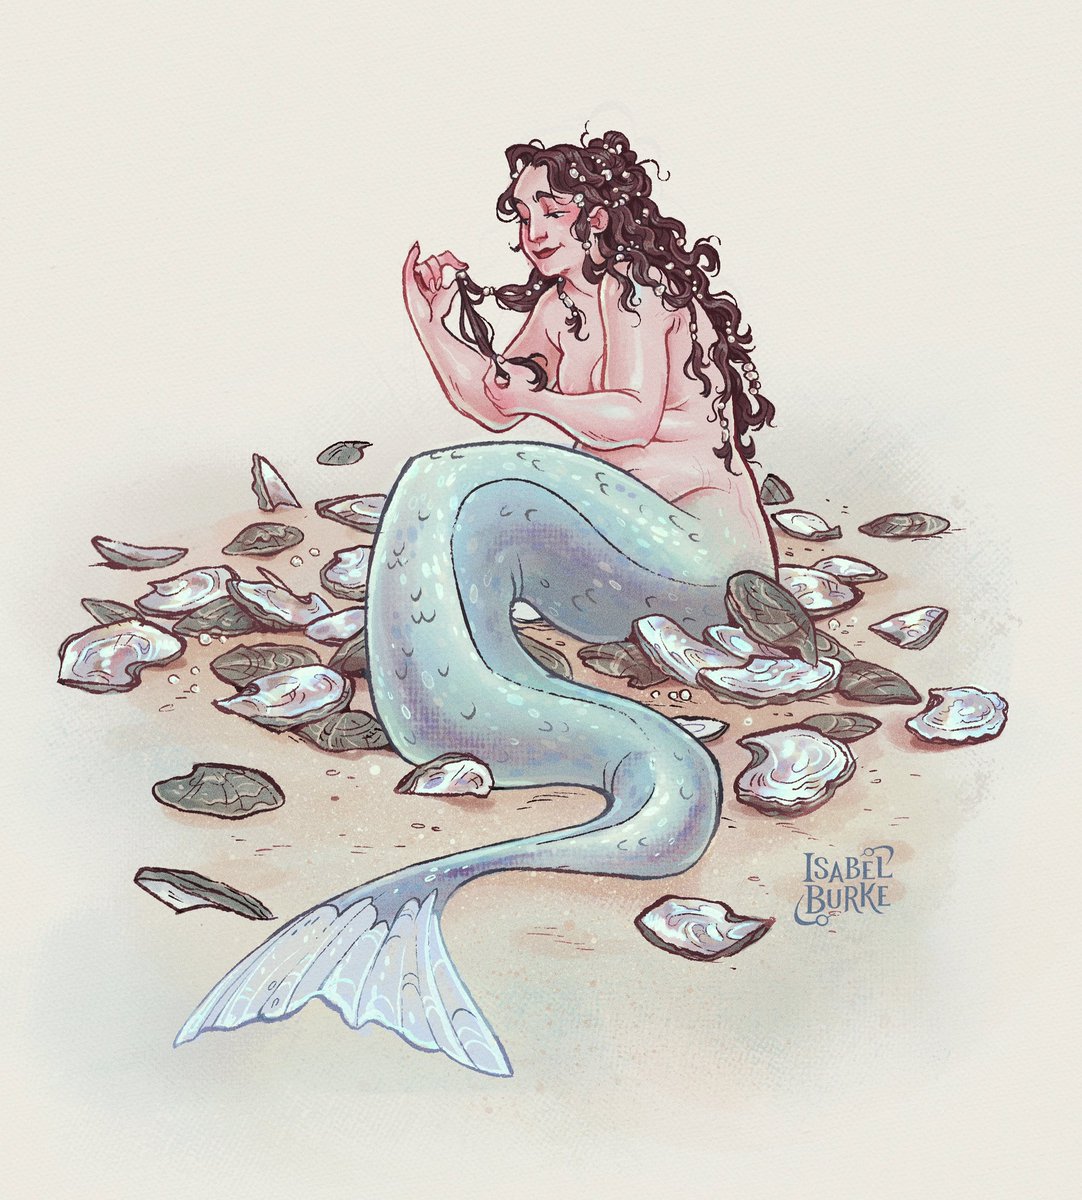 absolutely decimating local marine ecosystems but she looks cute doing it i guess #mermay